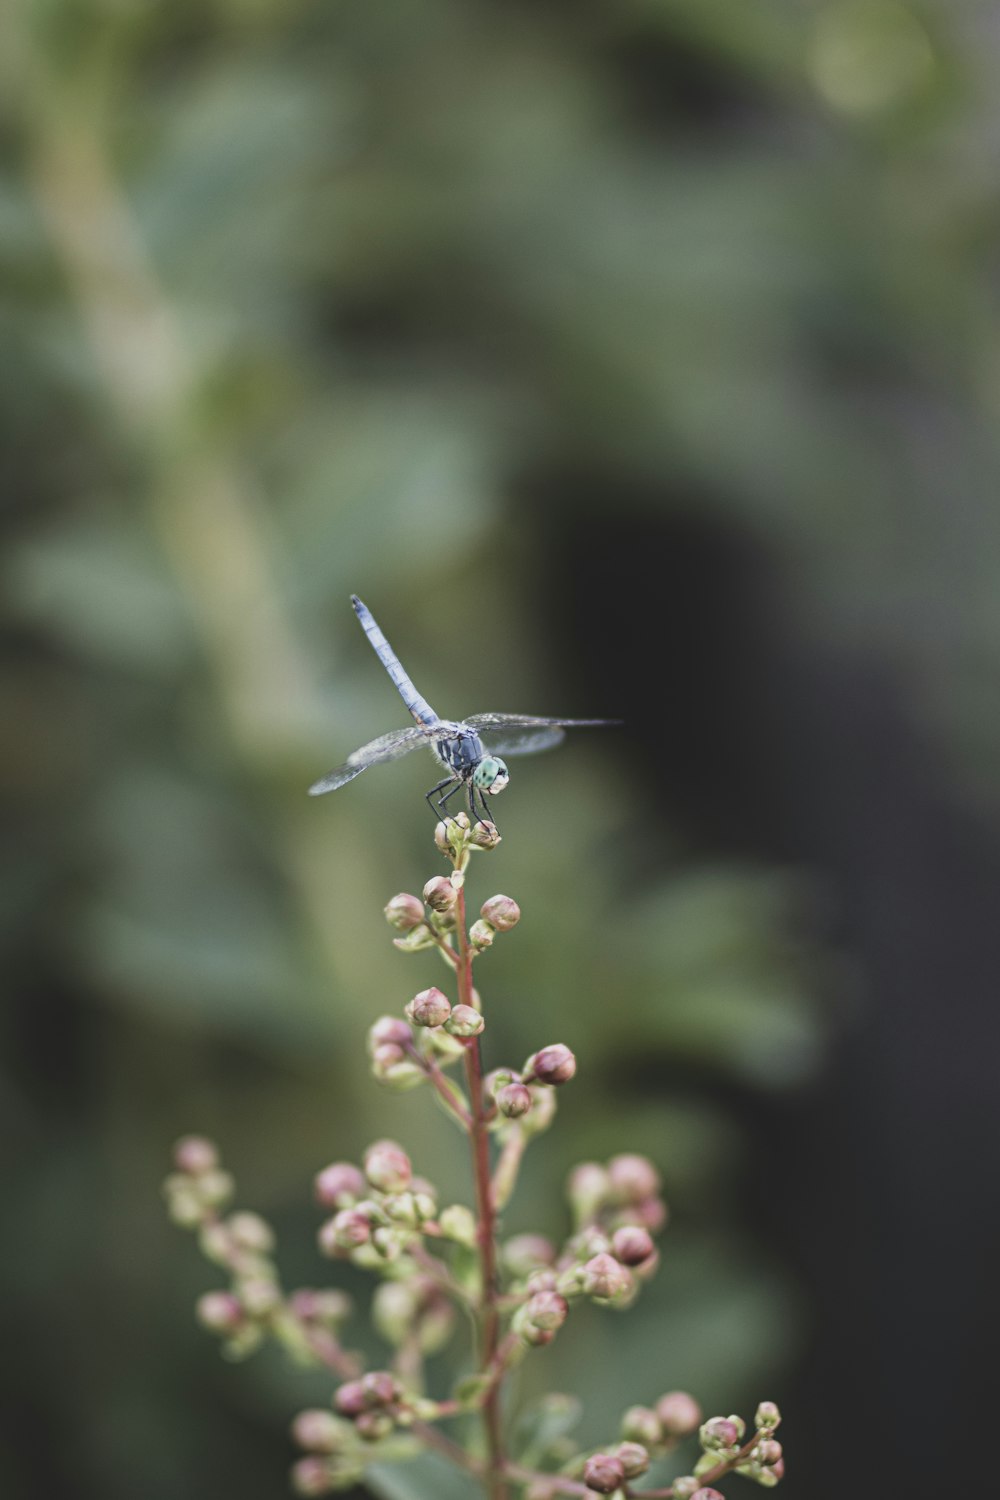 blue and white dragonfly perched on pink flower buds in tilt shift lens